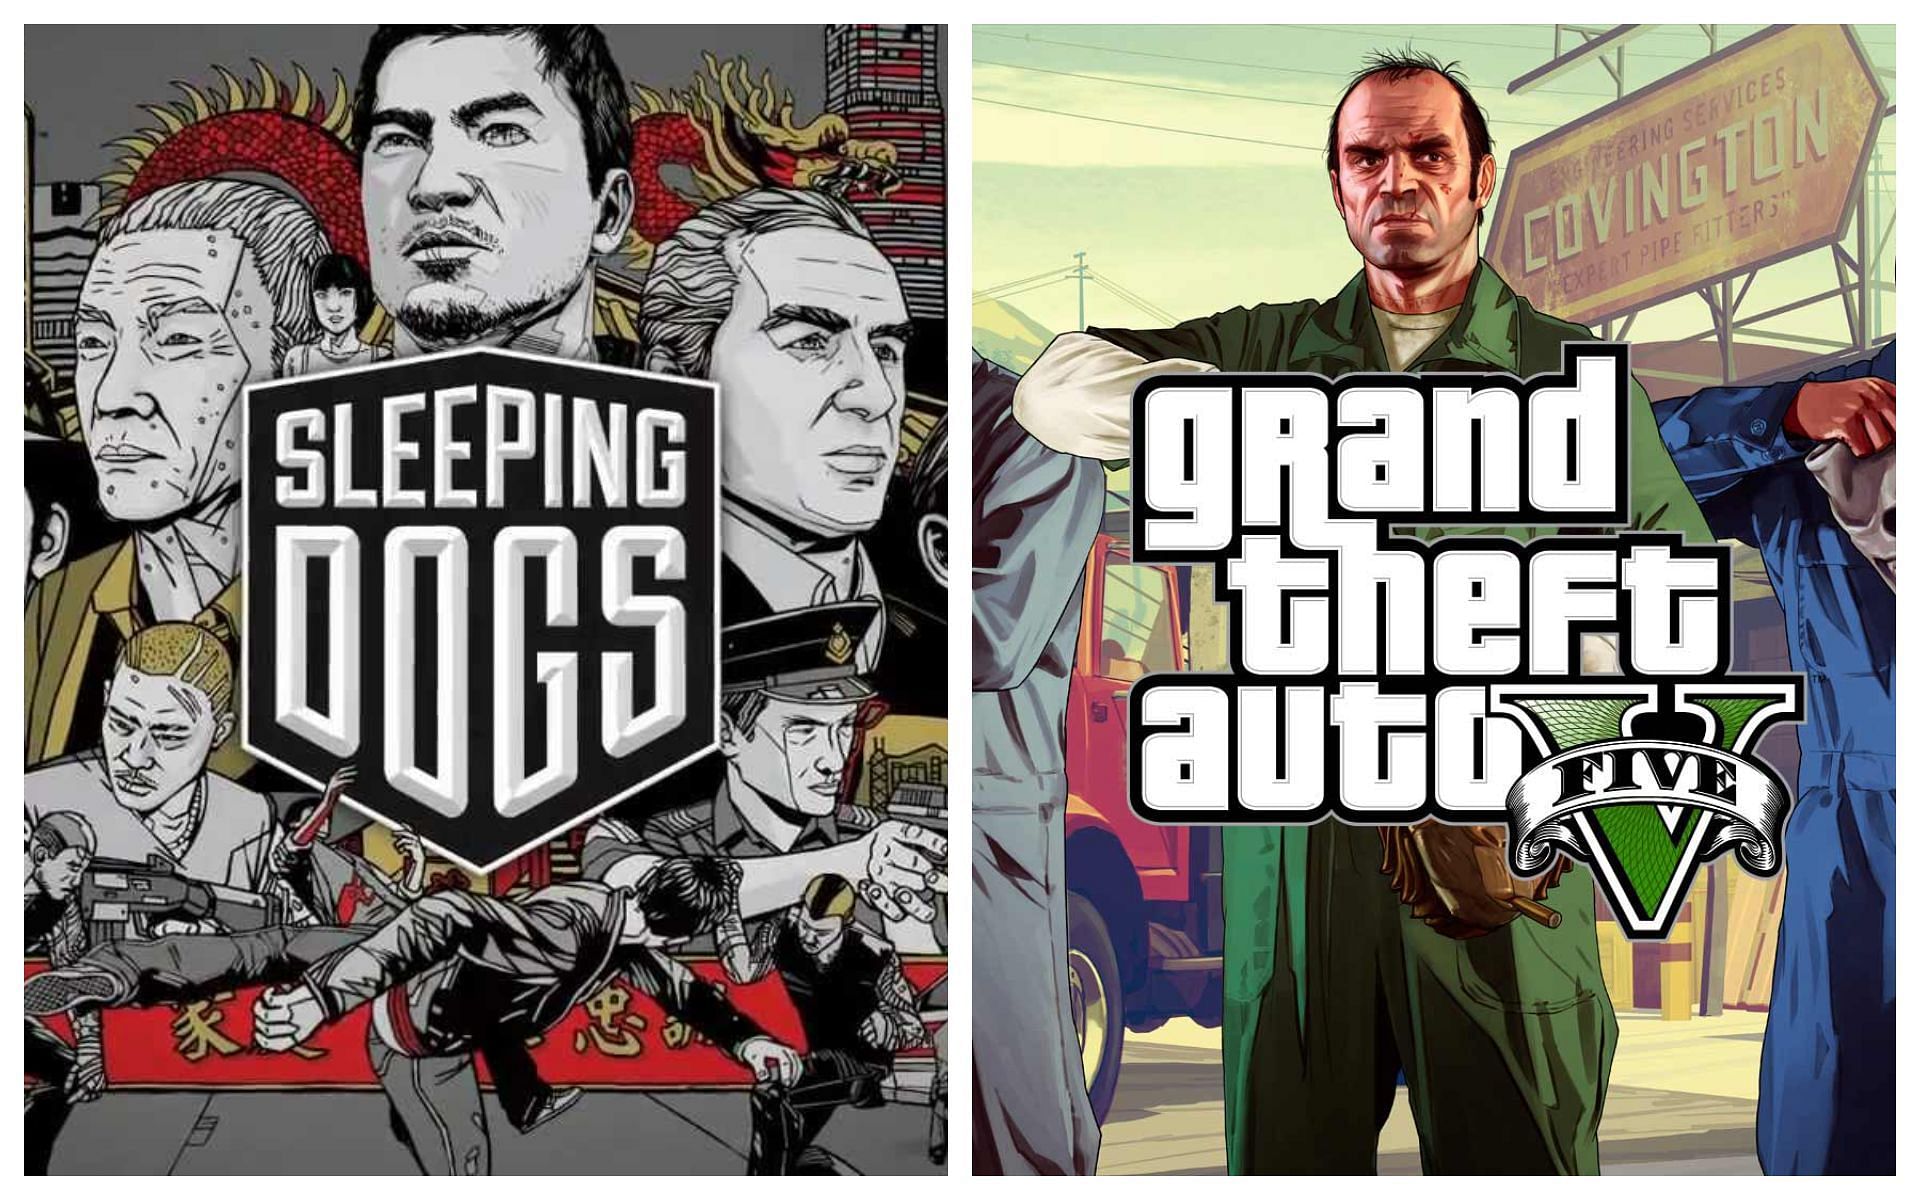 Similarities and differences between GTA 5 and Sleeping Dogs (Images via Square Enix and Rockstar Games)